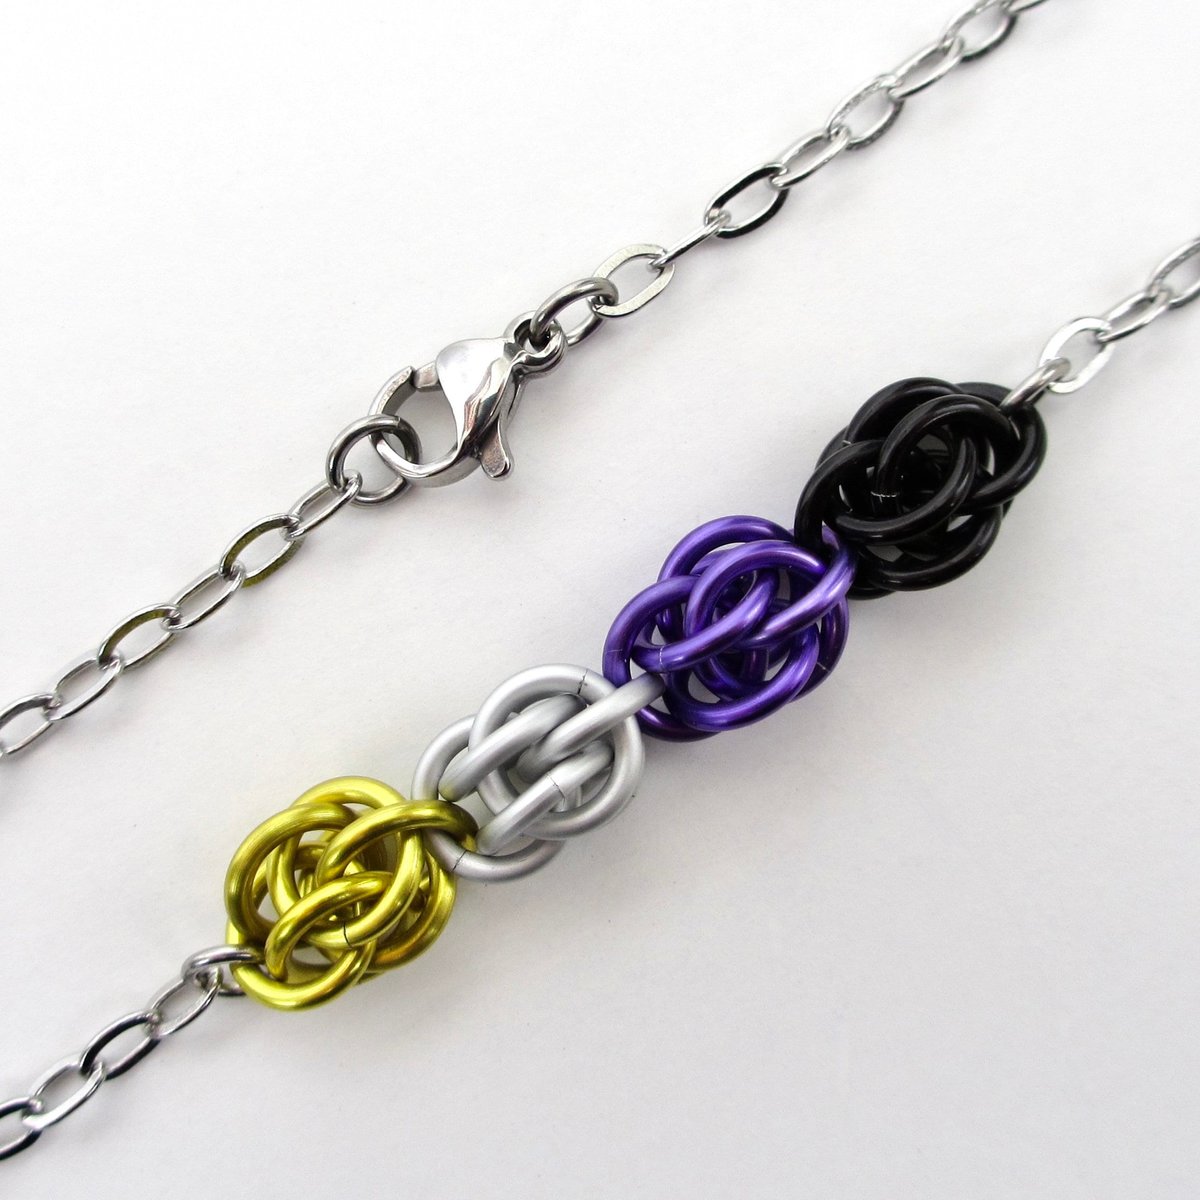 Nonbinary pride necklace, chainmail Sweetpea weave LGBTQ jewelry